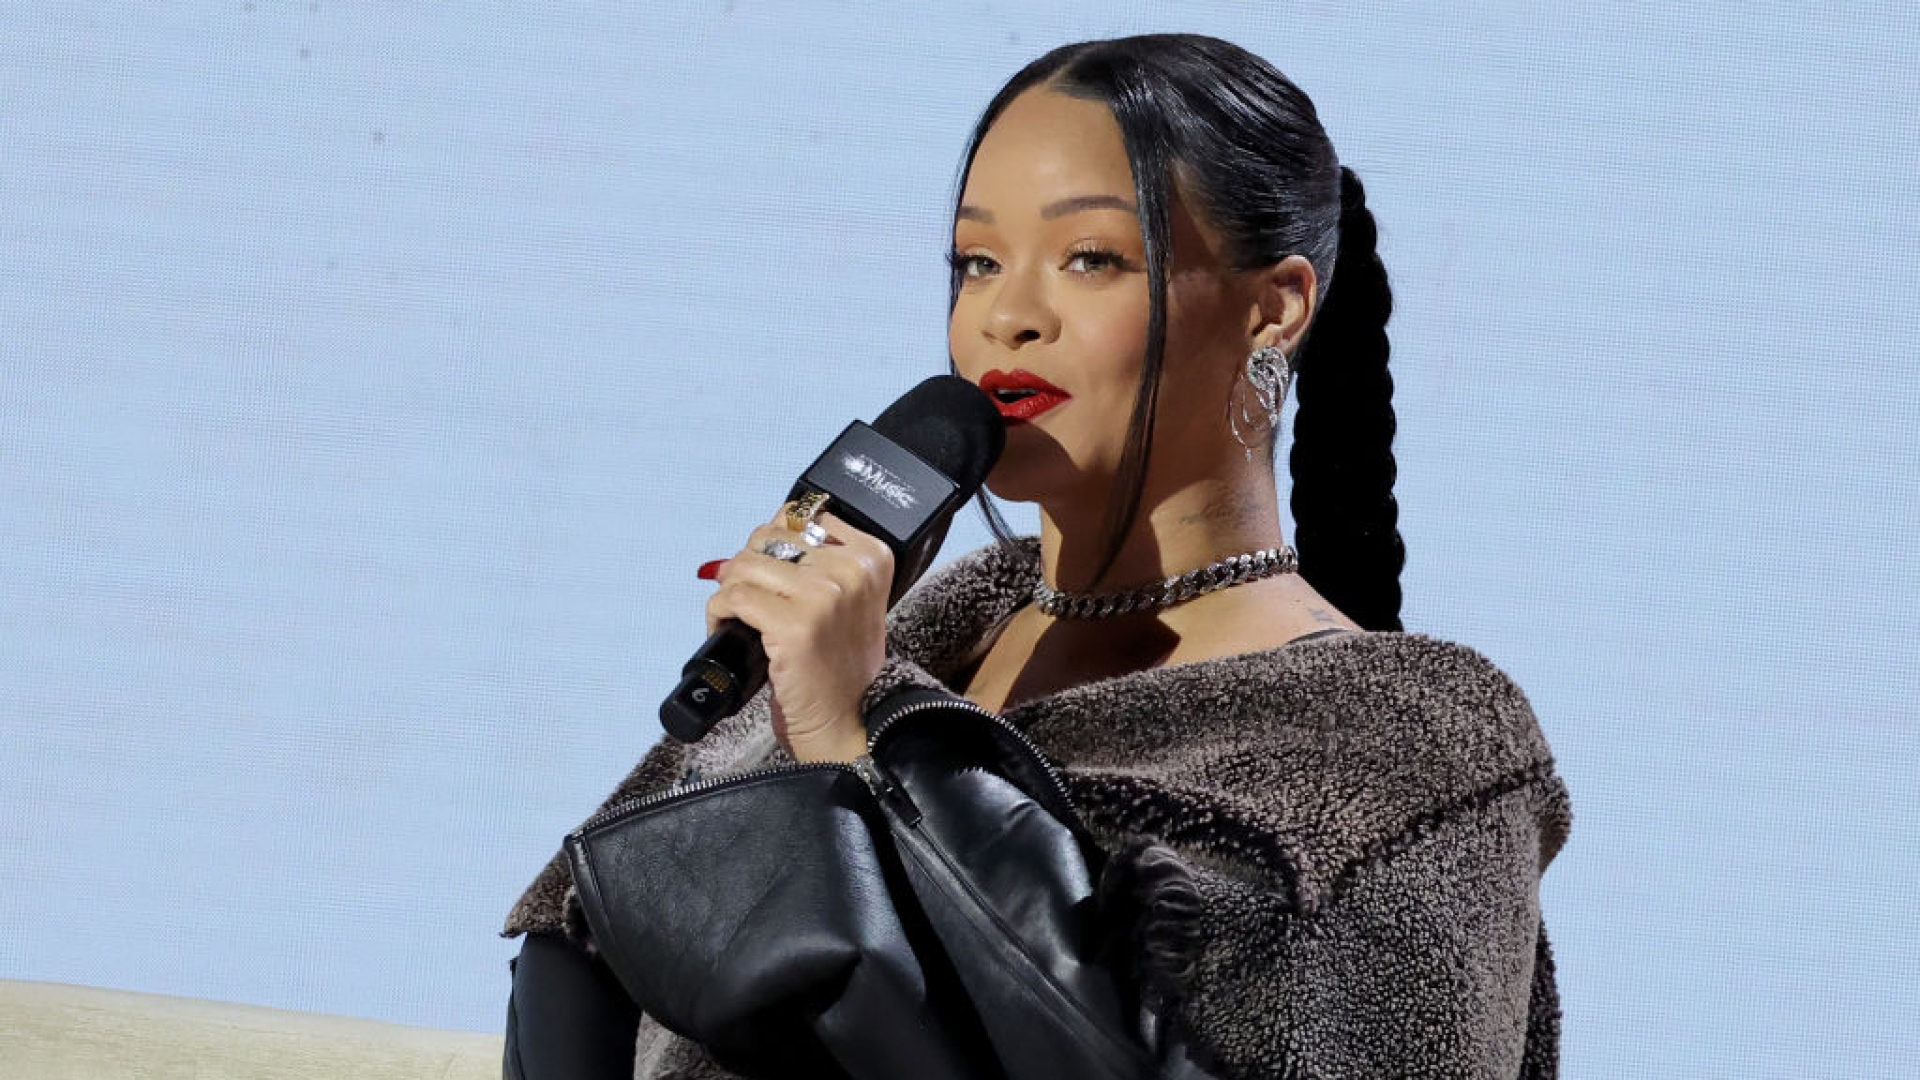 Rihanna at press conference for Super Bowl 2023 Halftime Show, photo